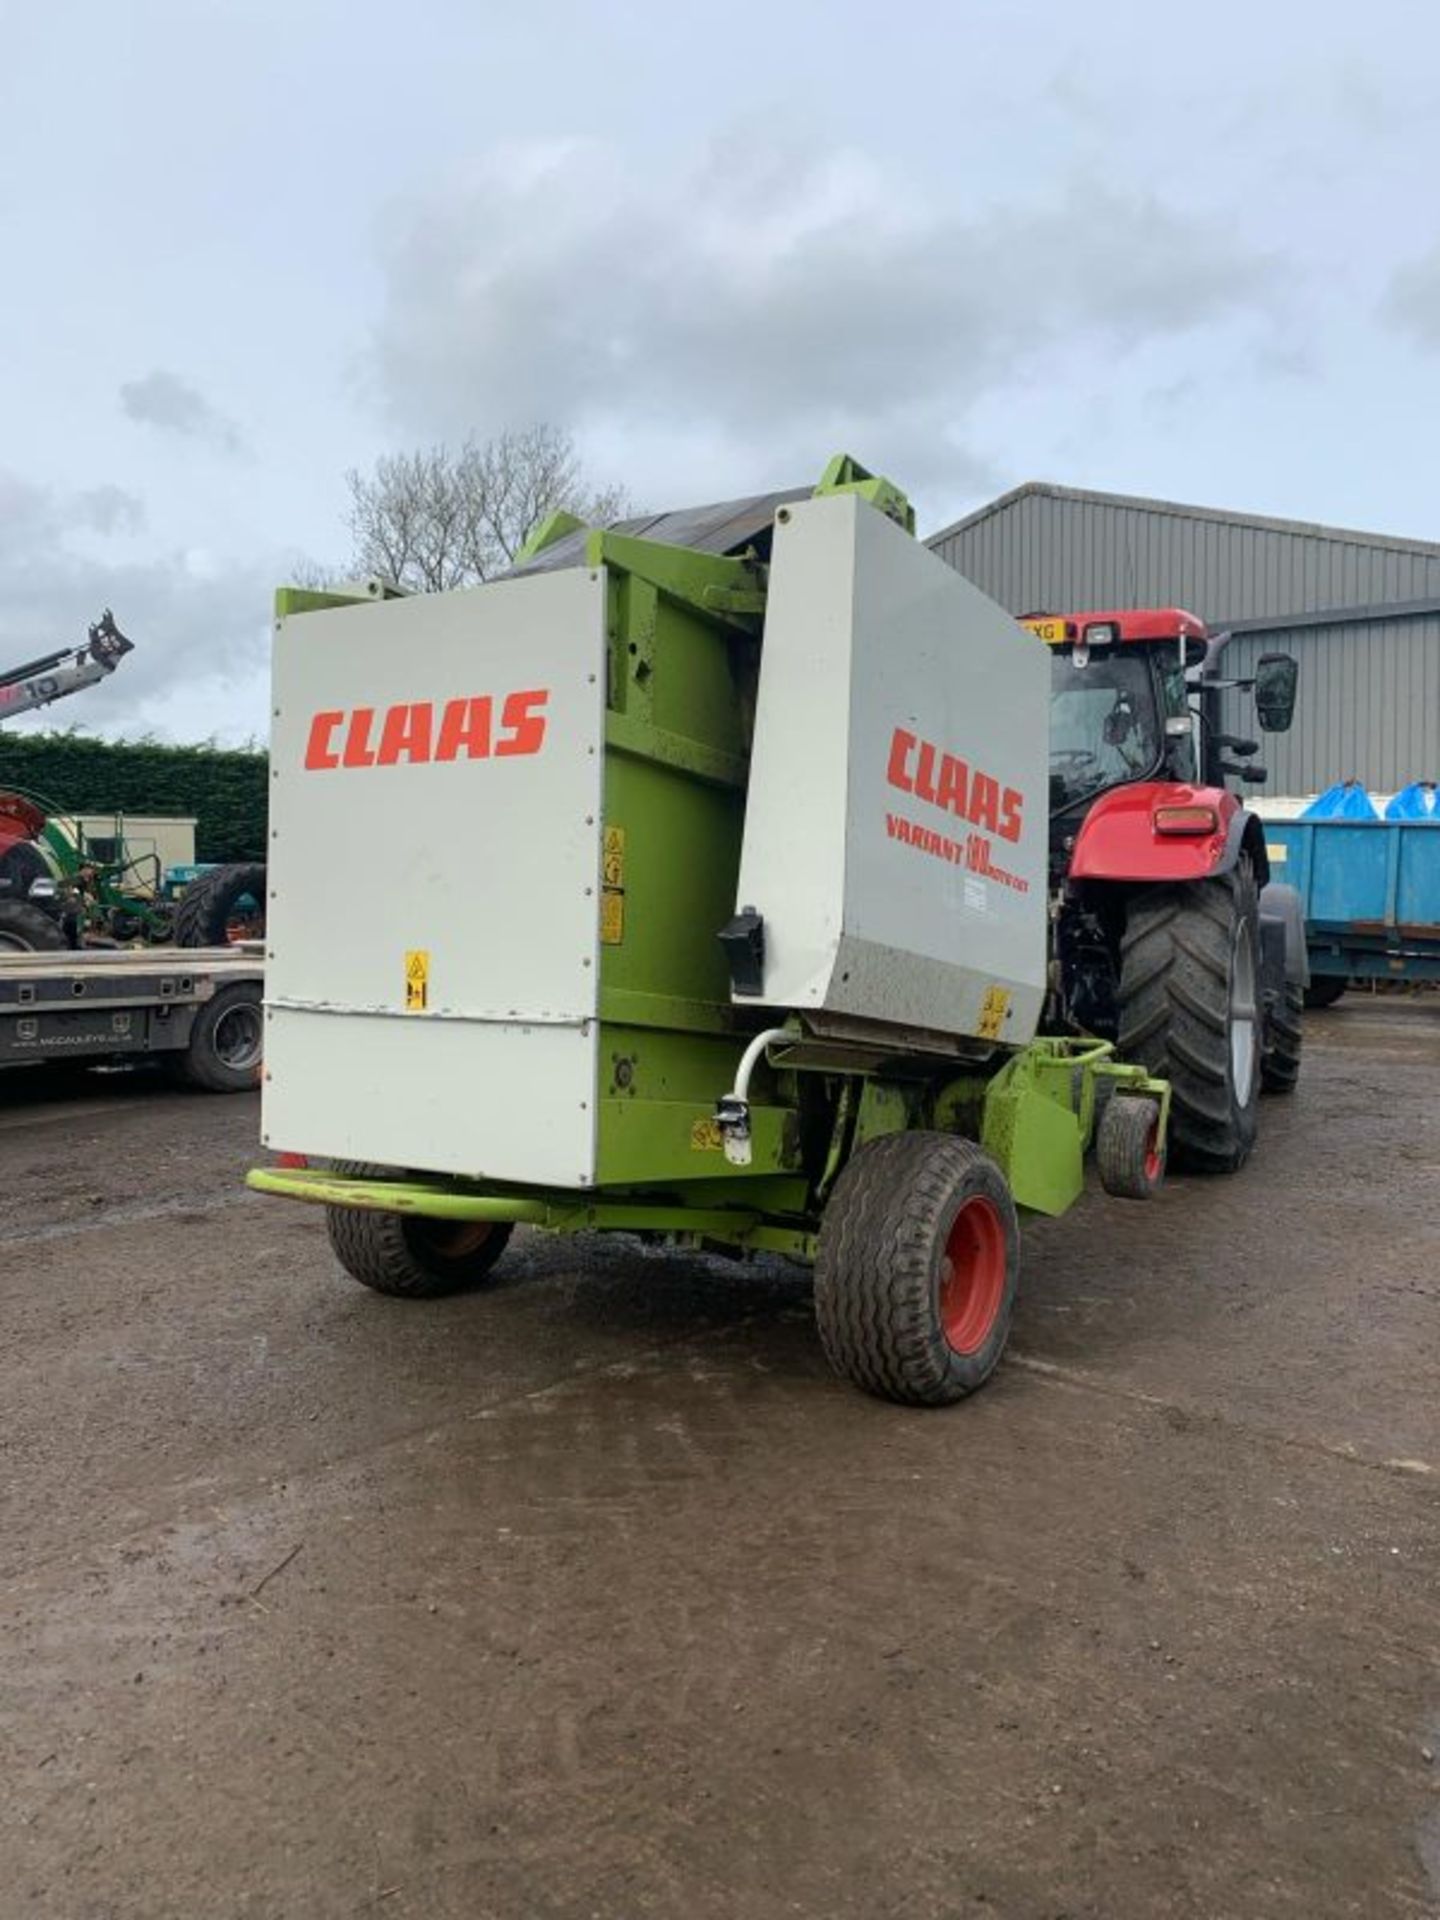 CLAAS VARIANT 180 ROTO CUT ROUND BALER - Image 10 of 12